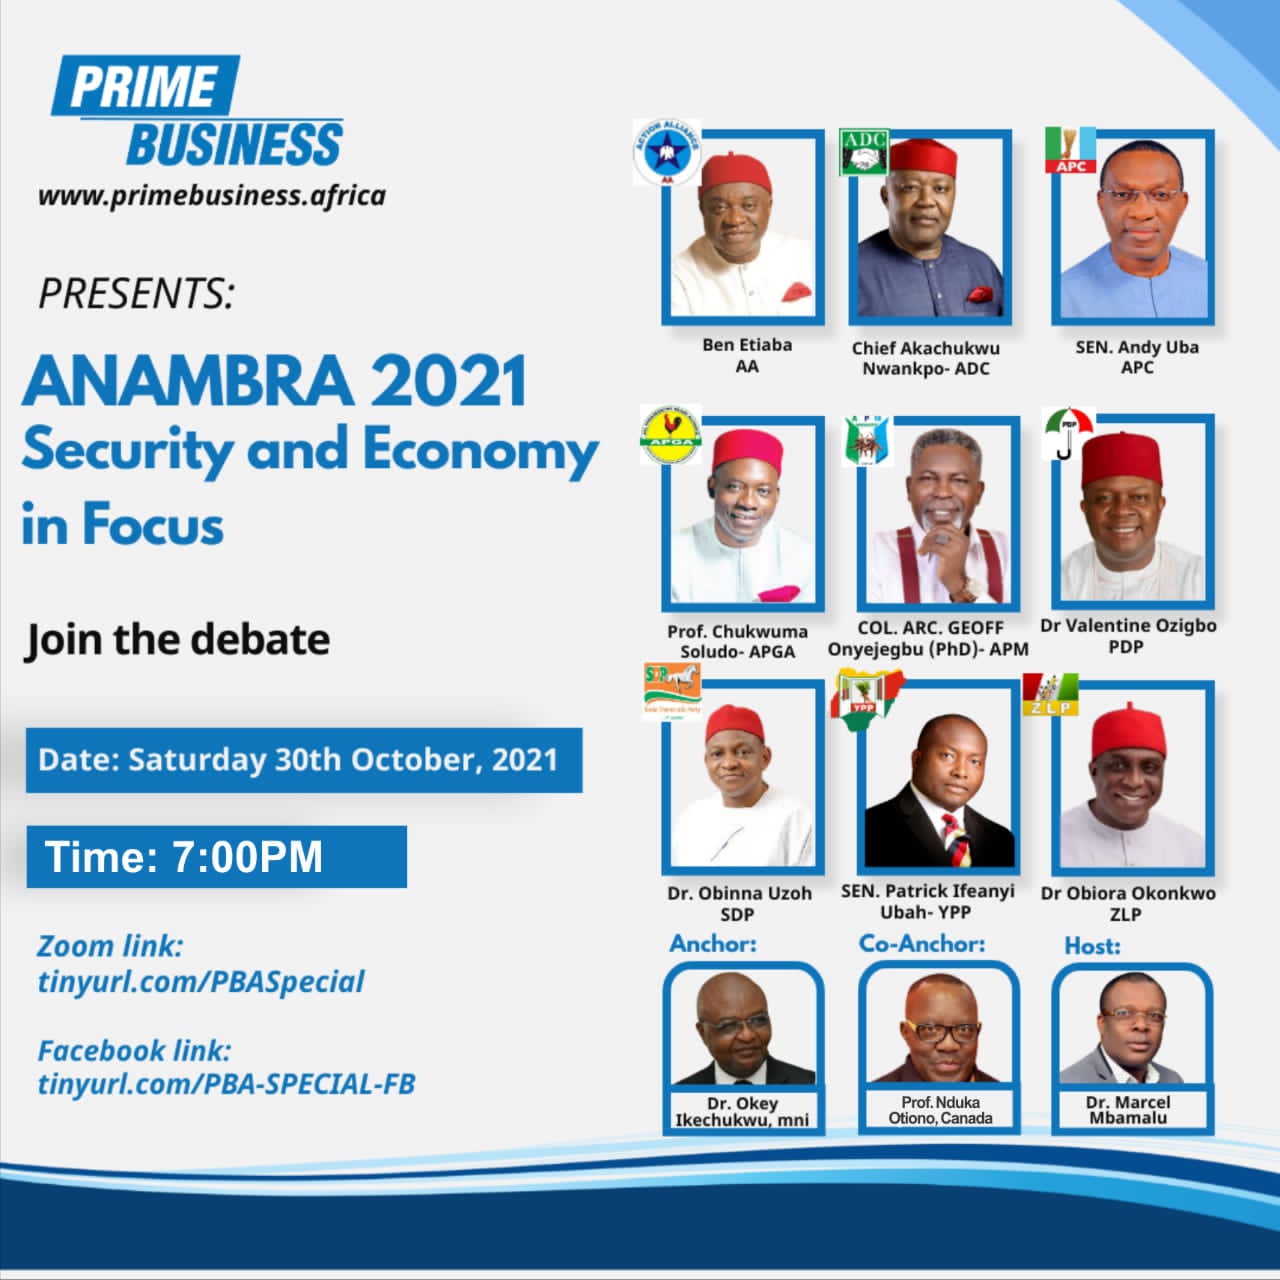 Prime Business Africa Debate on Anambra security and economy flyer